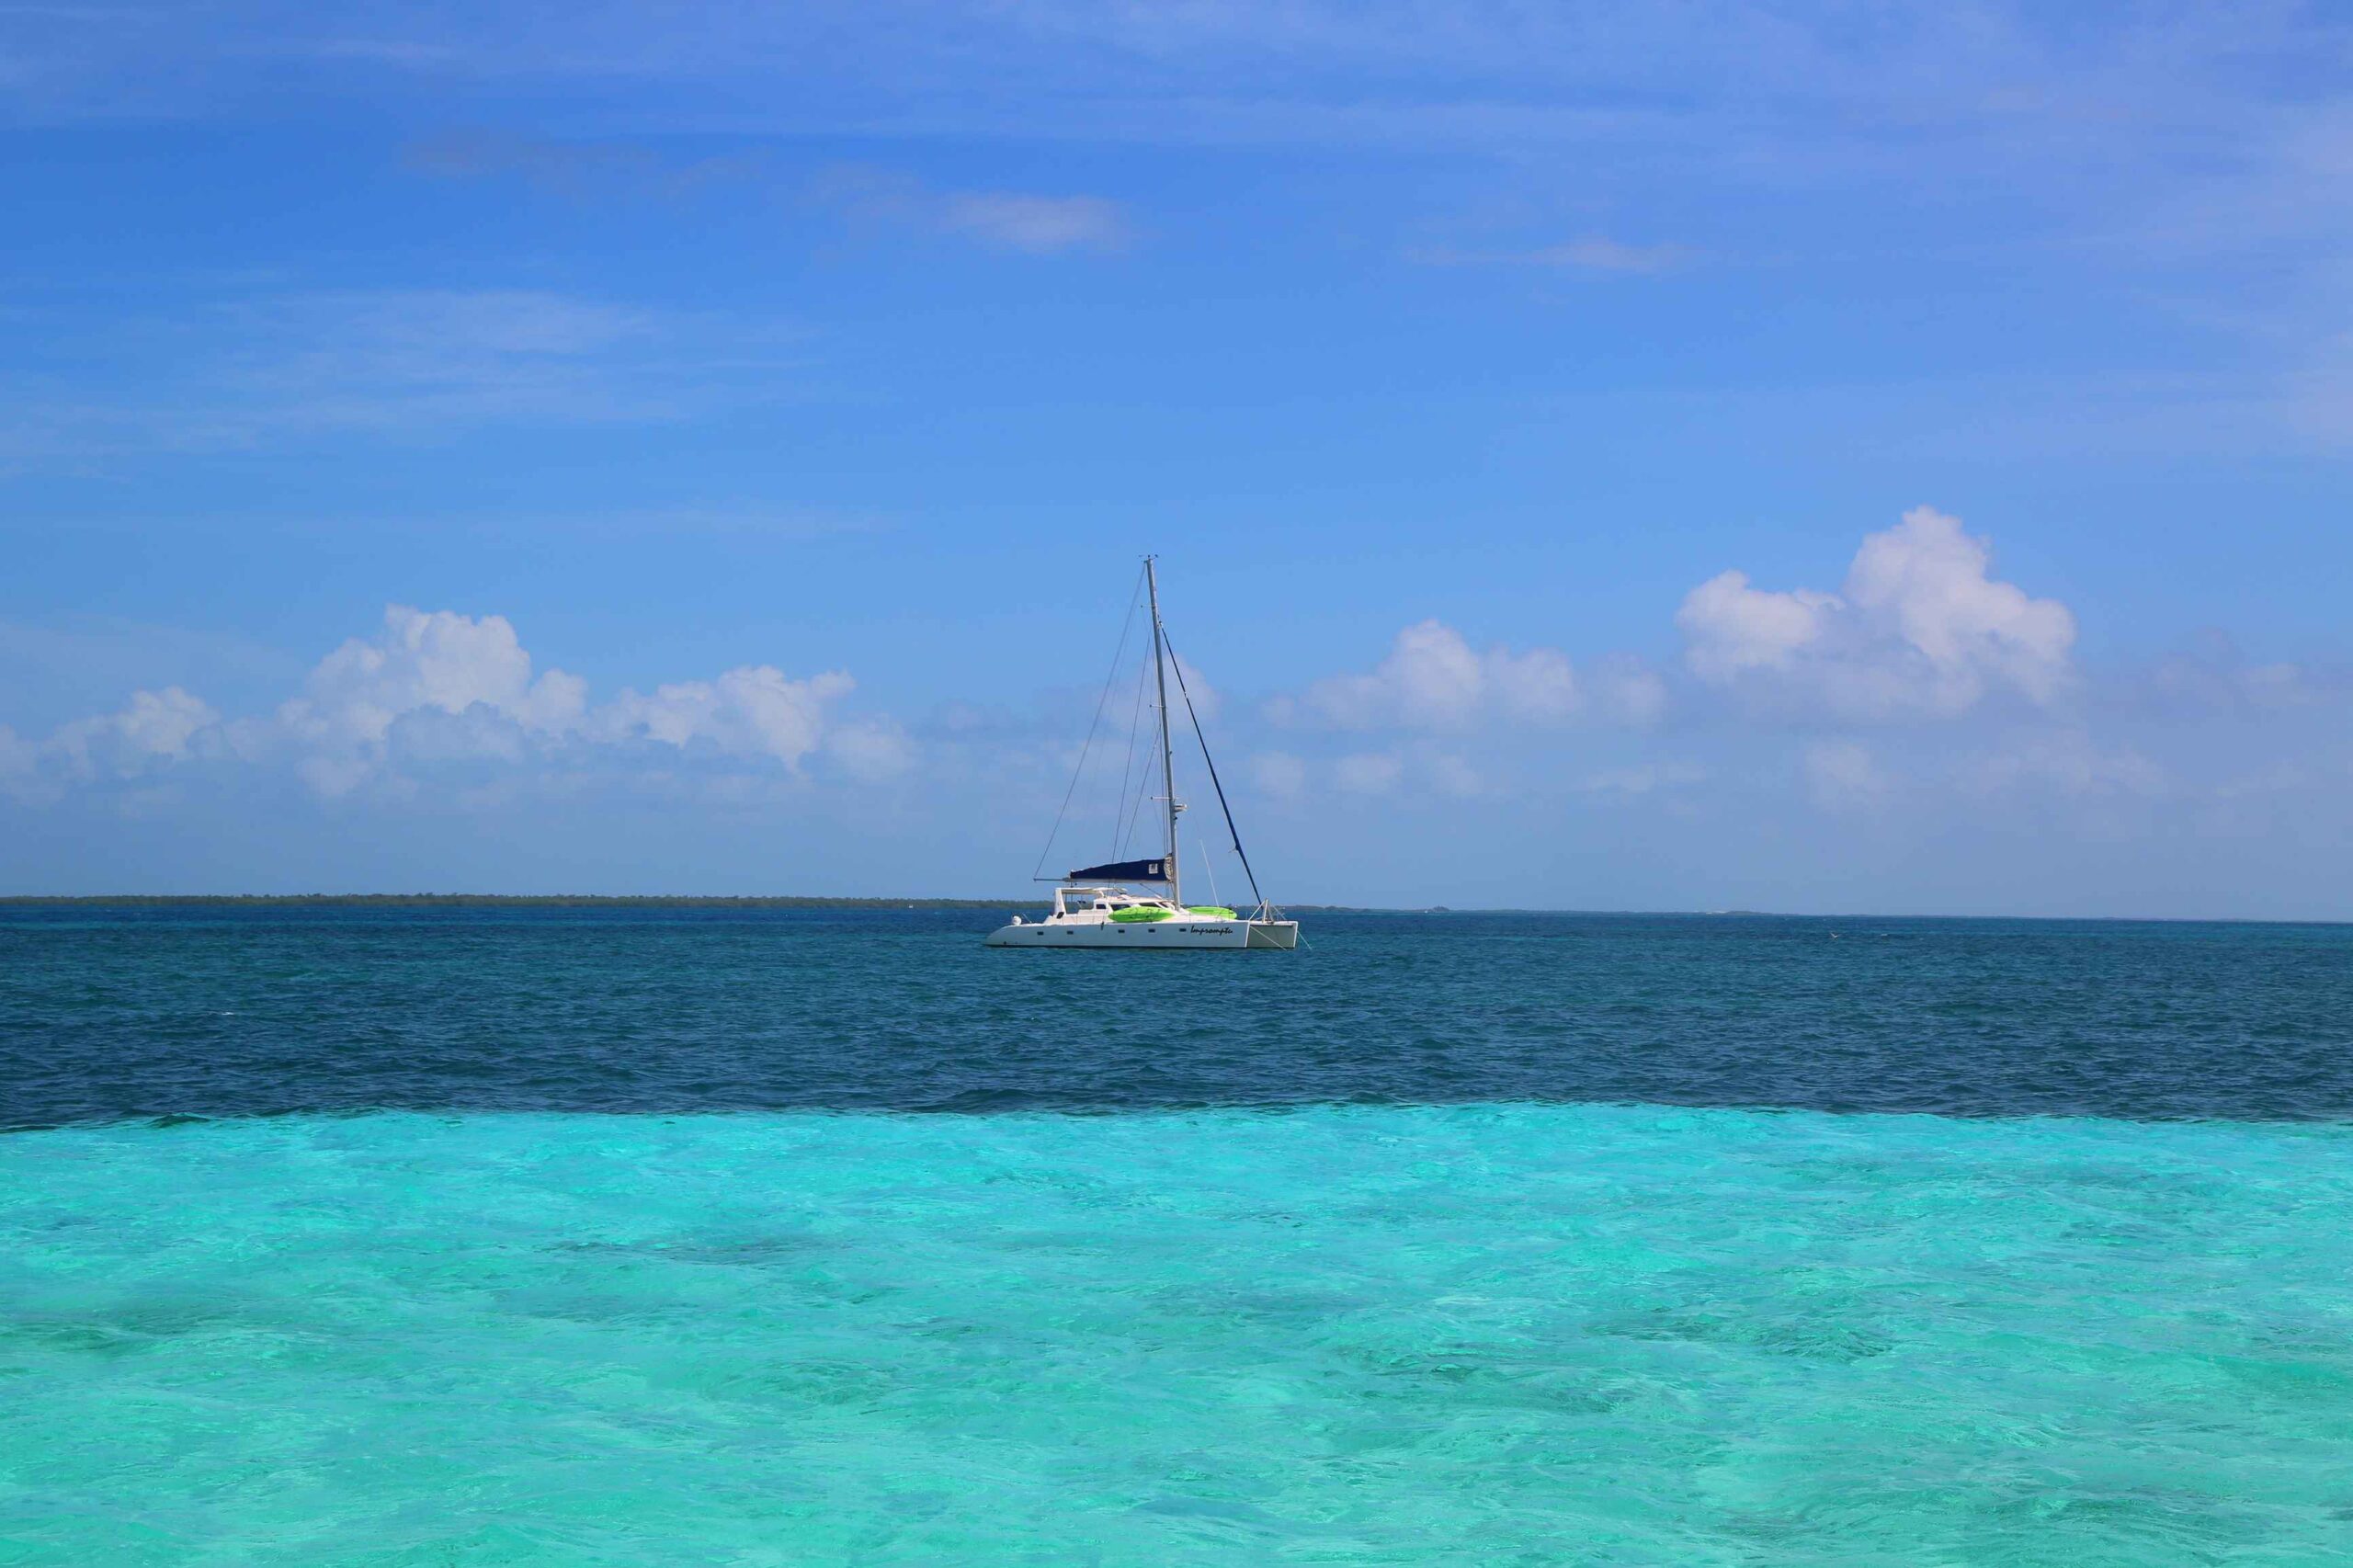 Catamaran used for sailing tour on blue waters